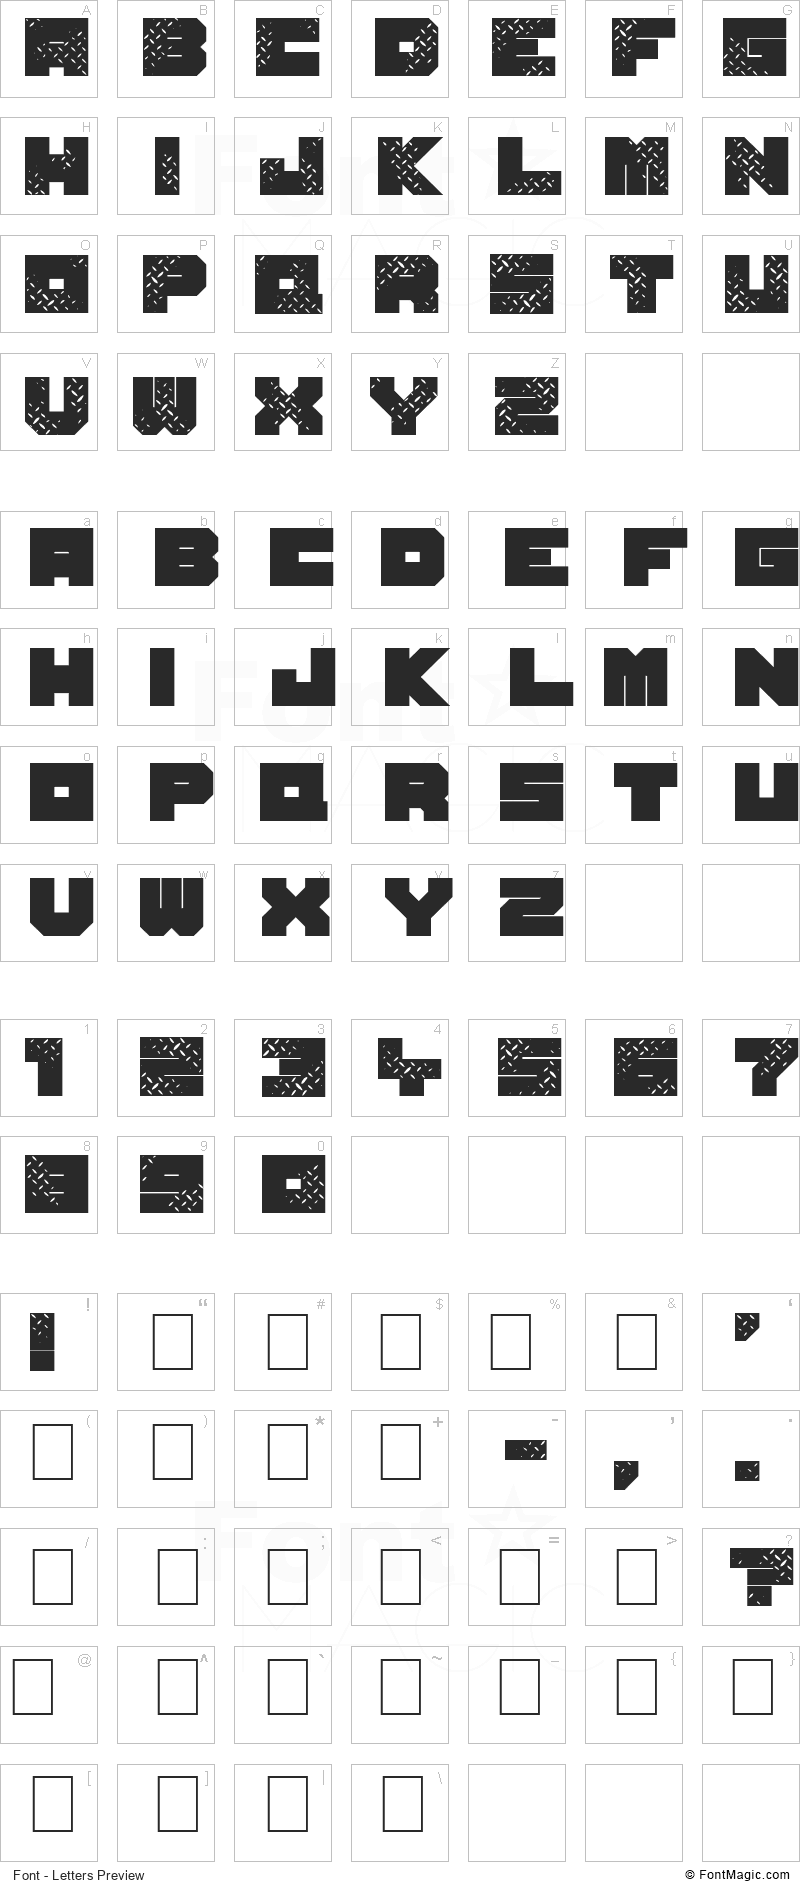 Seven of One Font - All Latters Preview Chart